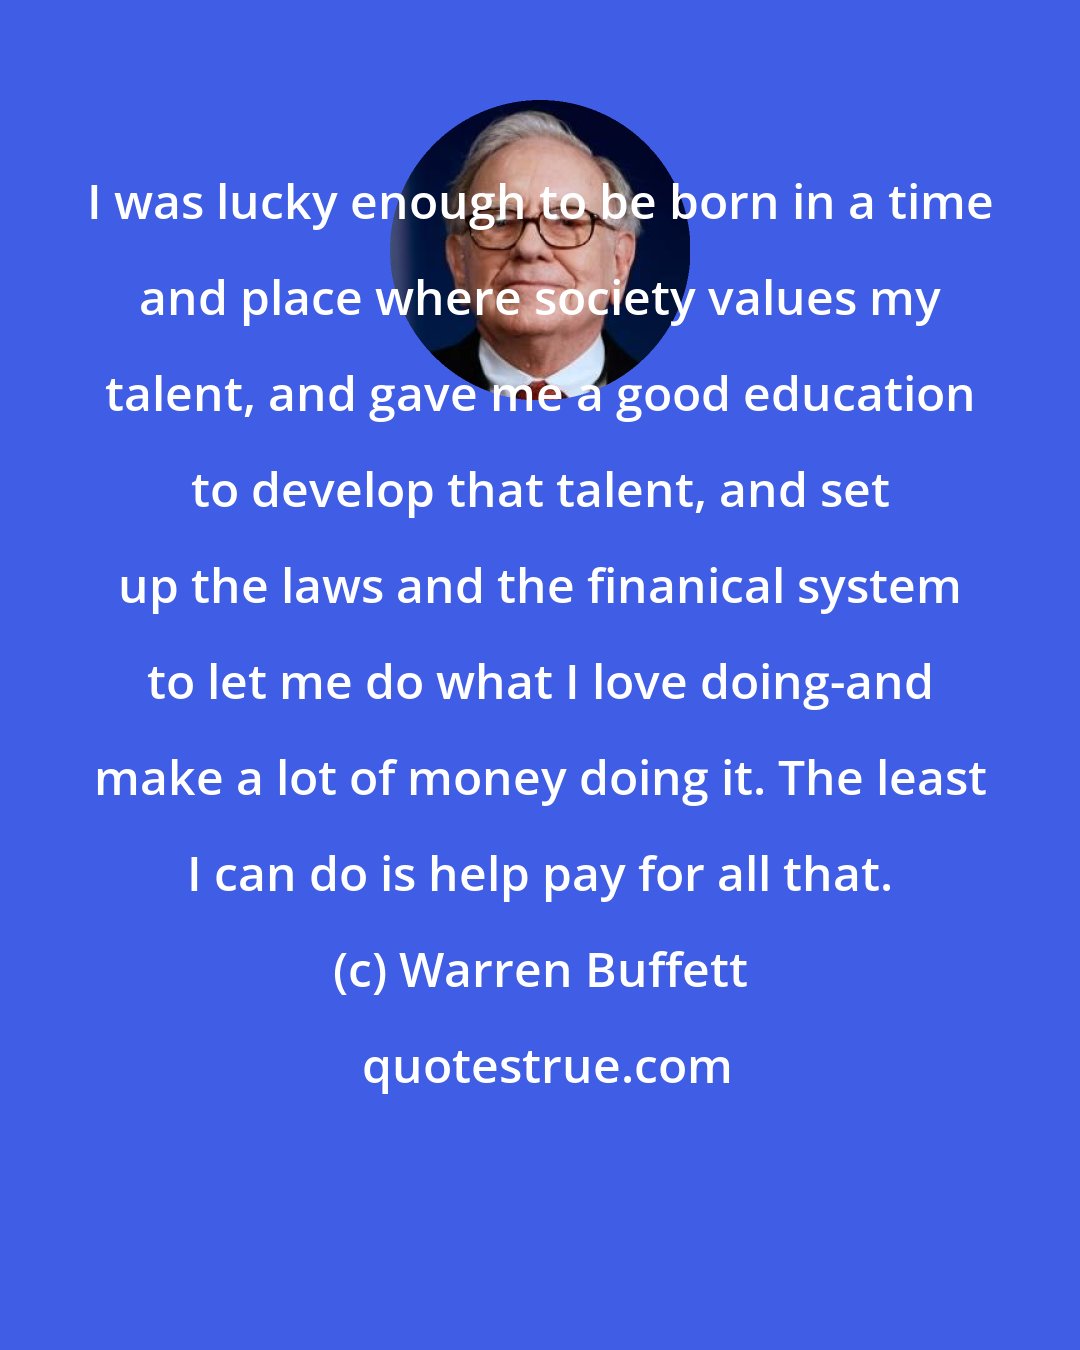 Warren Buffett: I was lucky enough to be born in a time and place where society values my talent, and gave me a good education to develop that talent, and set up the laws and the finanical system to let me do what I love doing-and make a lot of money doing it. The least I can do is help pay for all that.